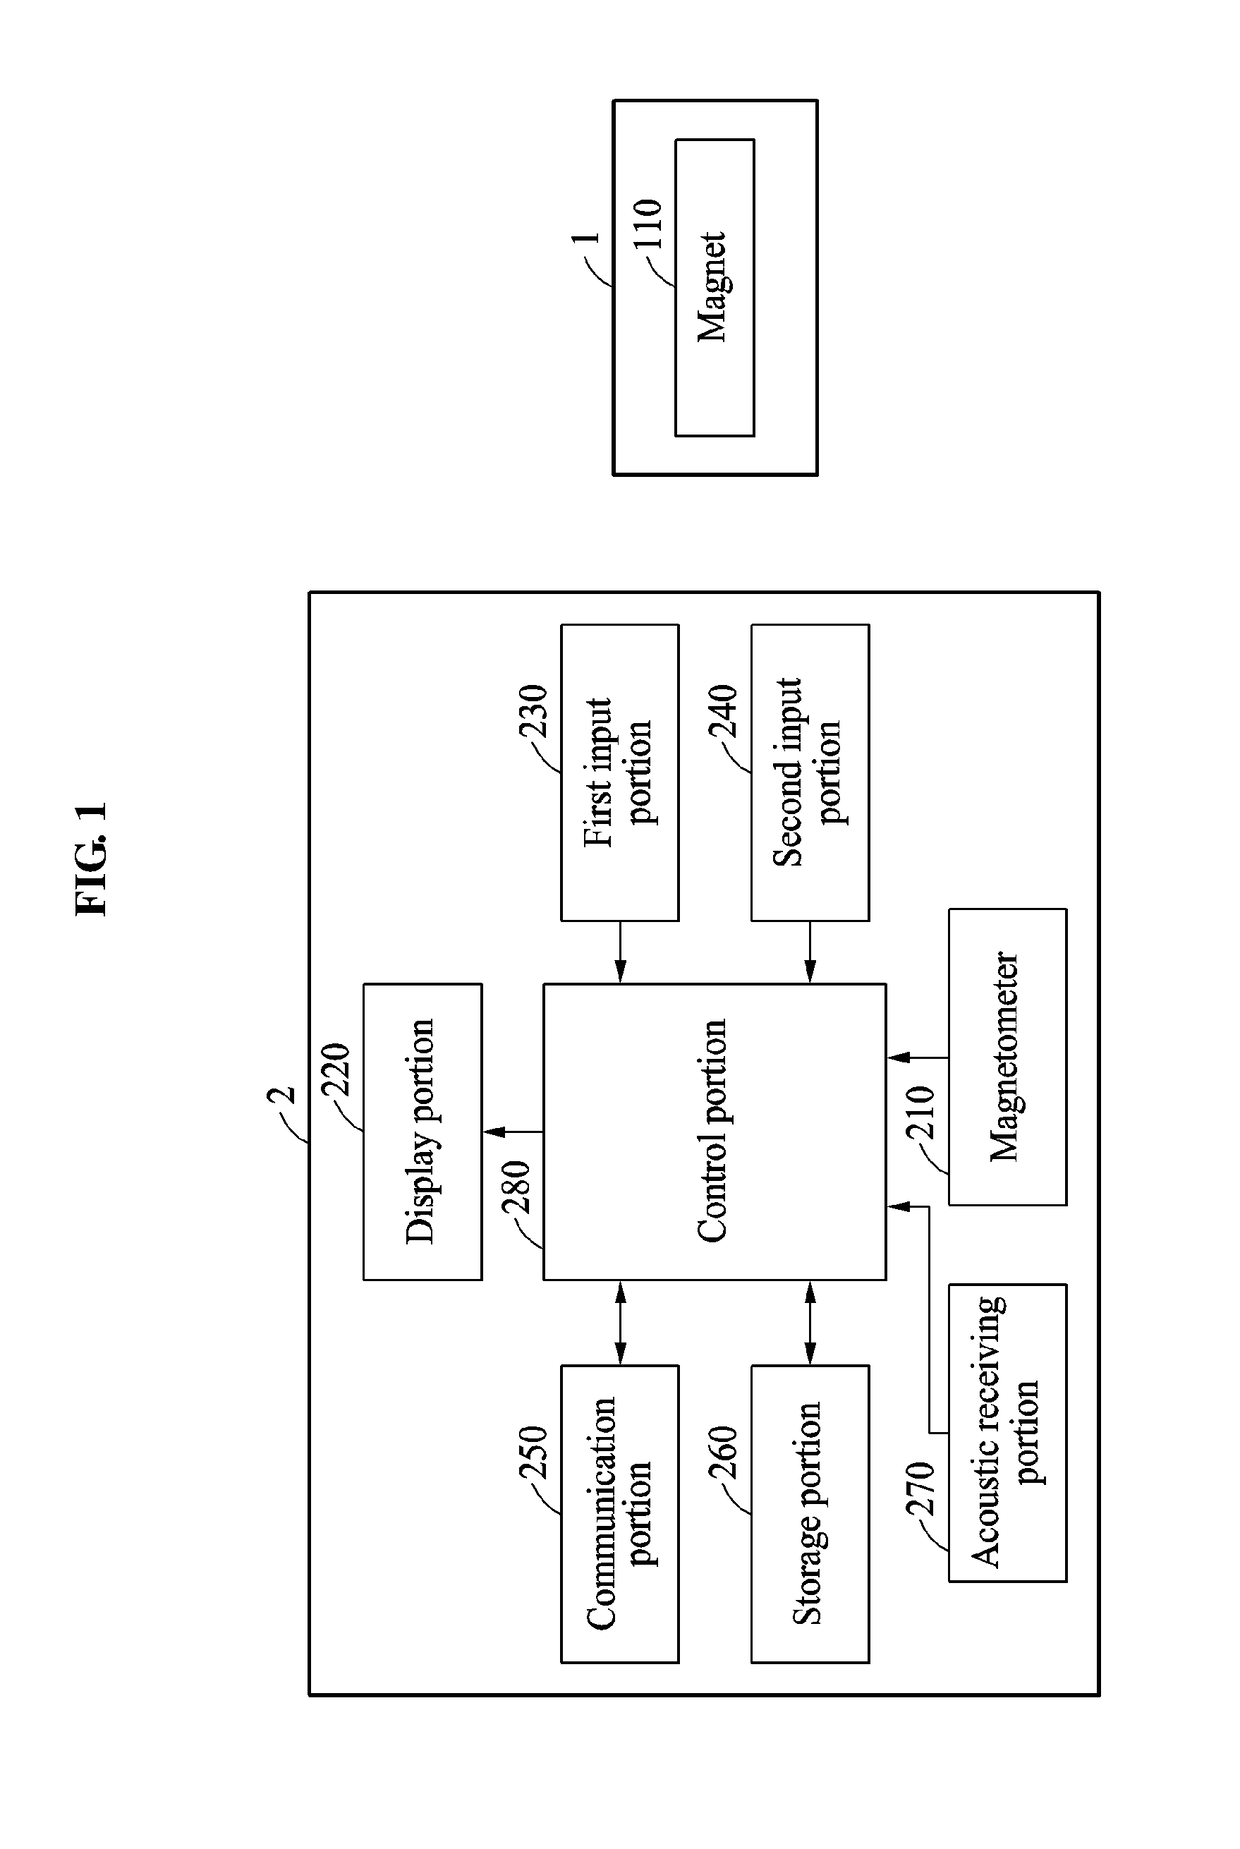 Input device for transmitting user input